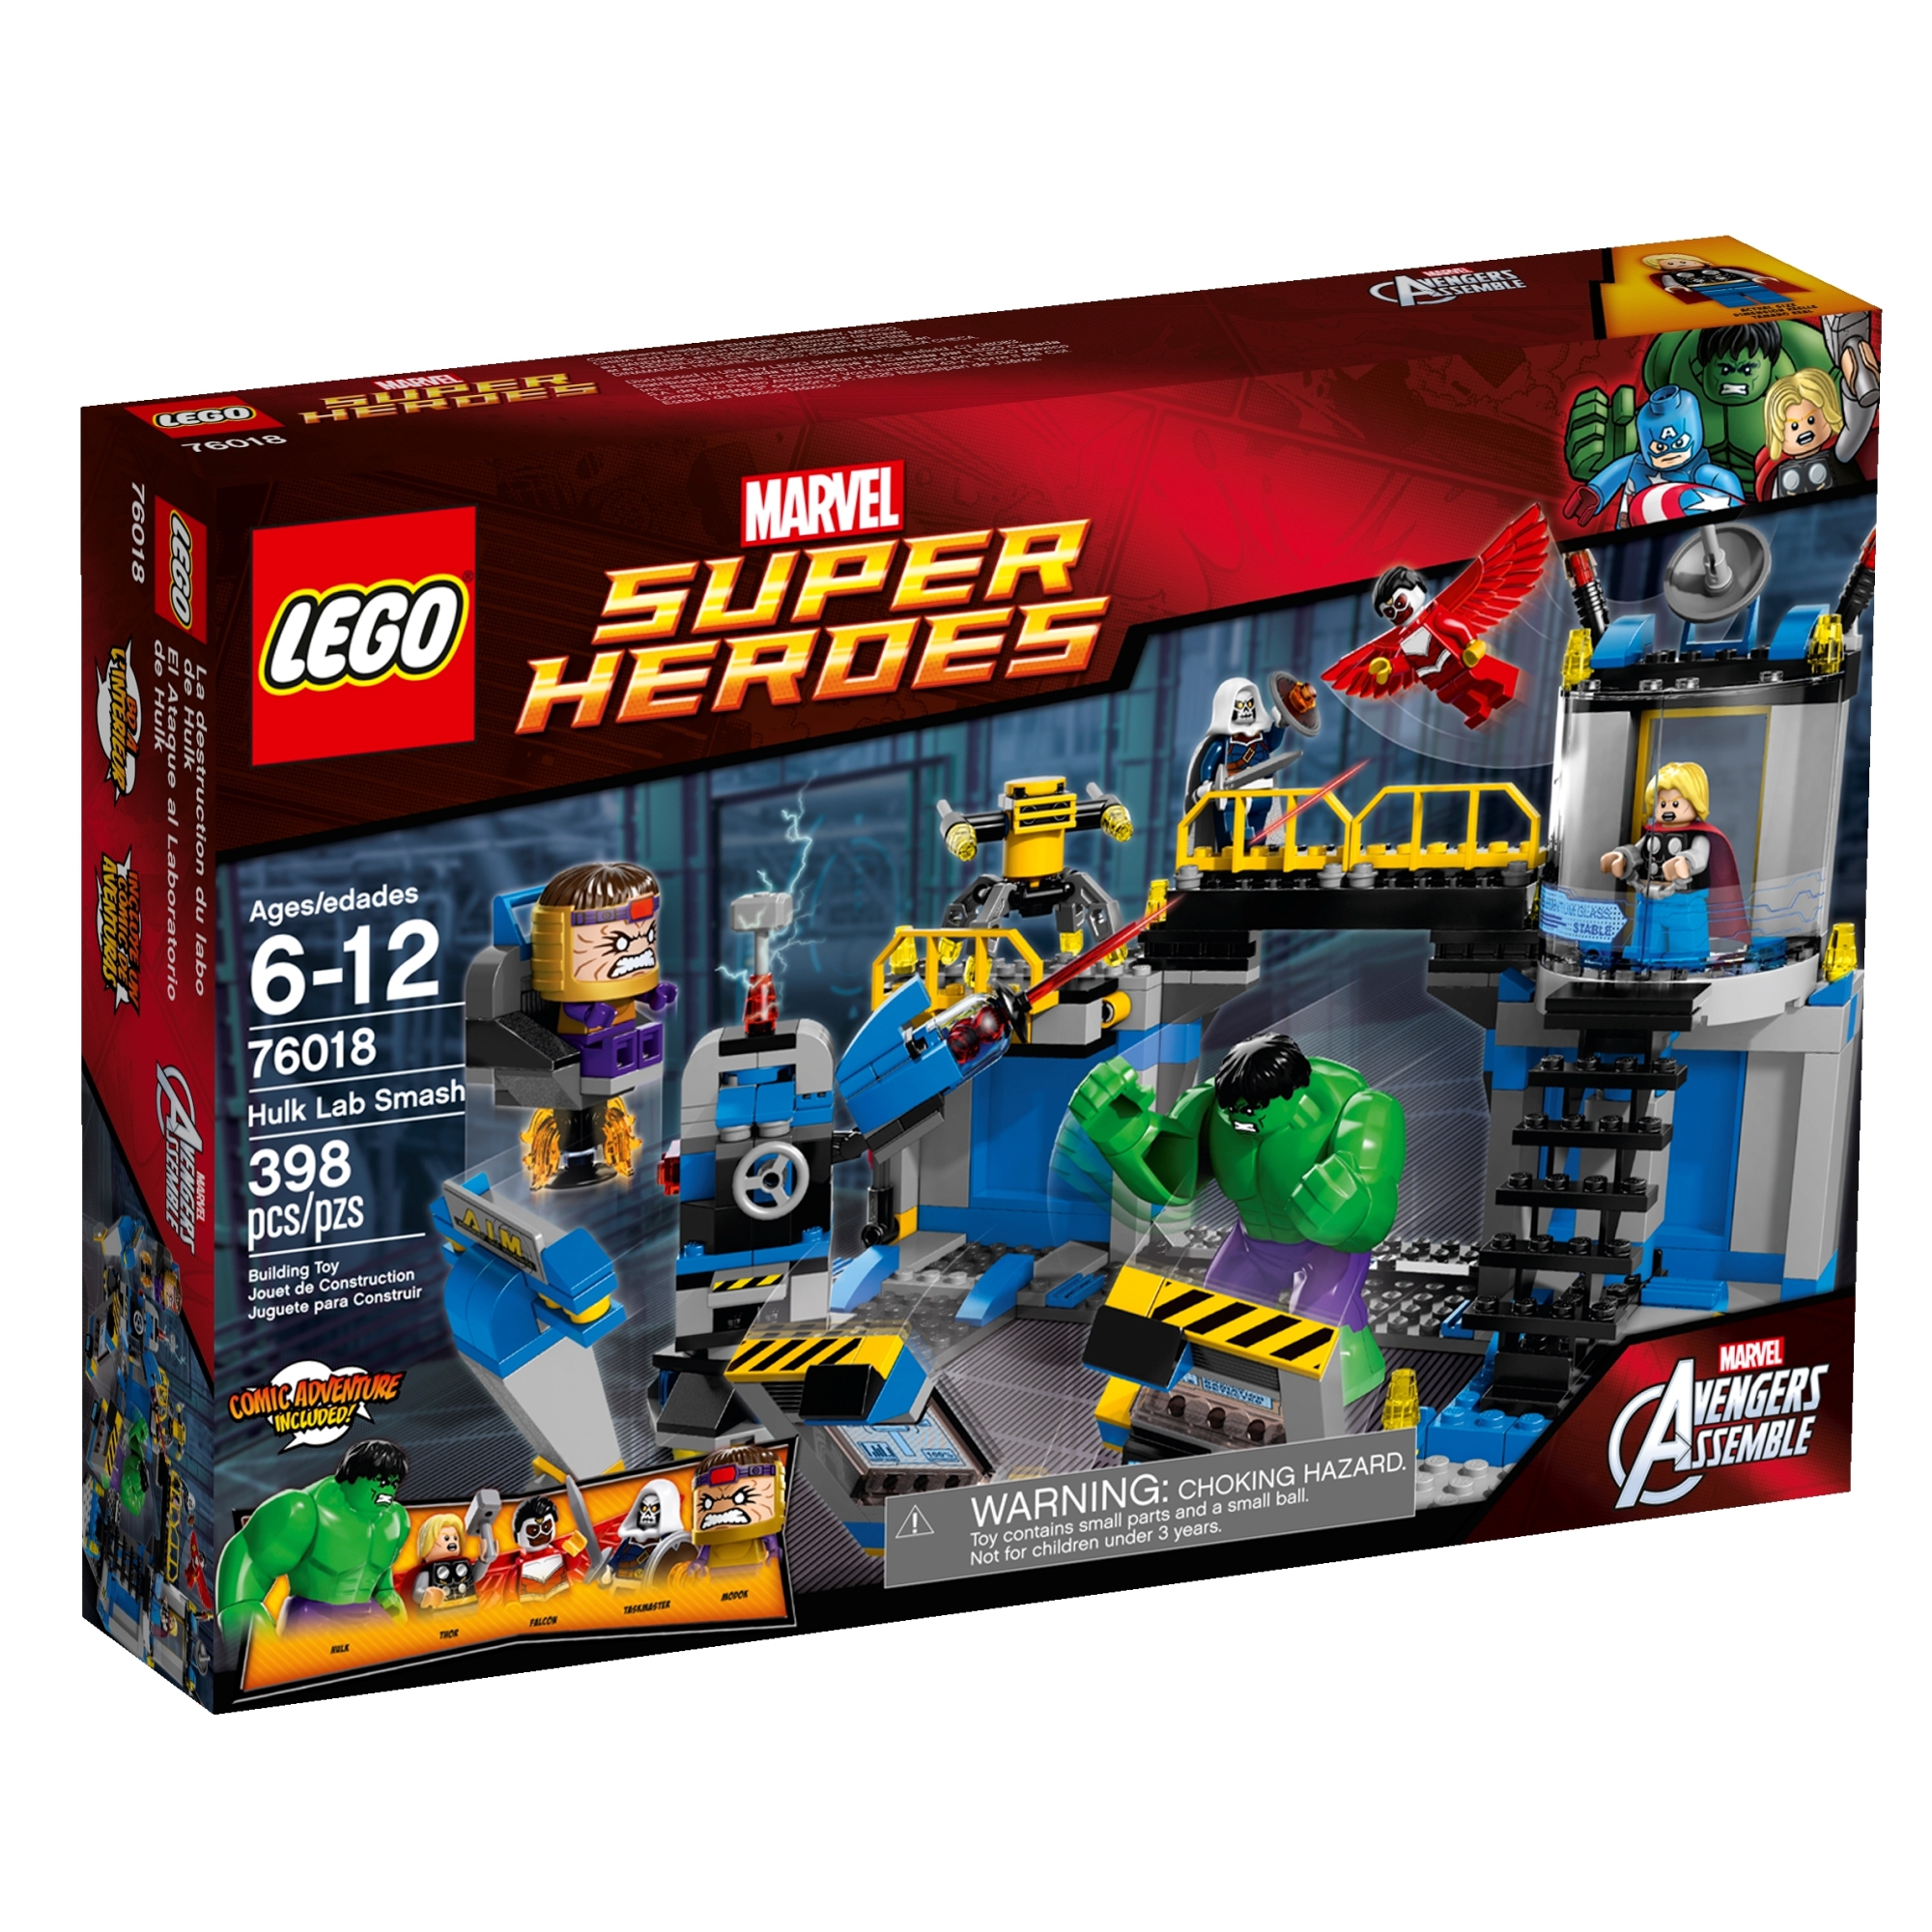  Bothans • View topic  LEGO Marvel Super Hero Sets For 2014 Revealed